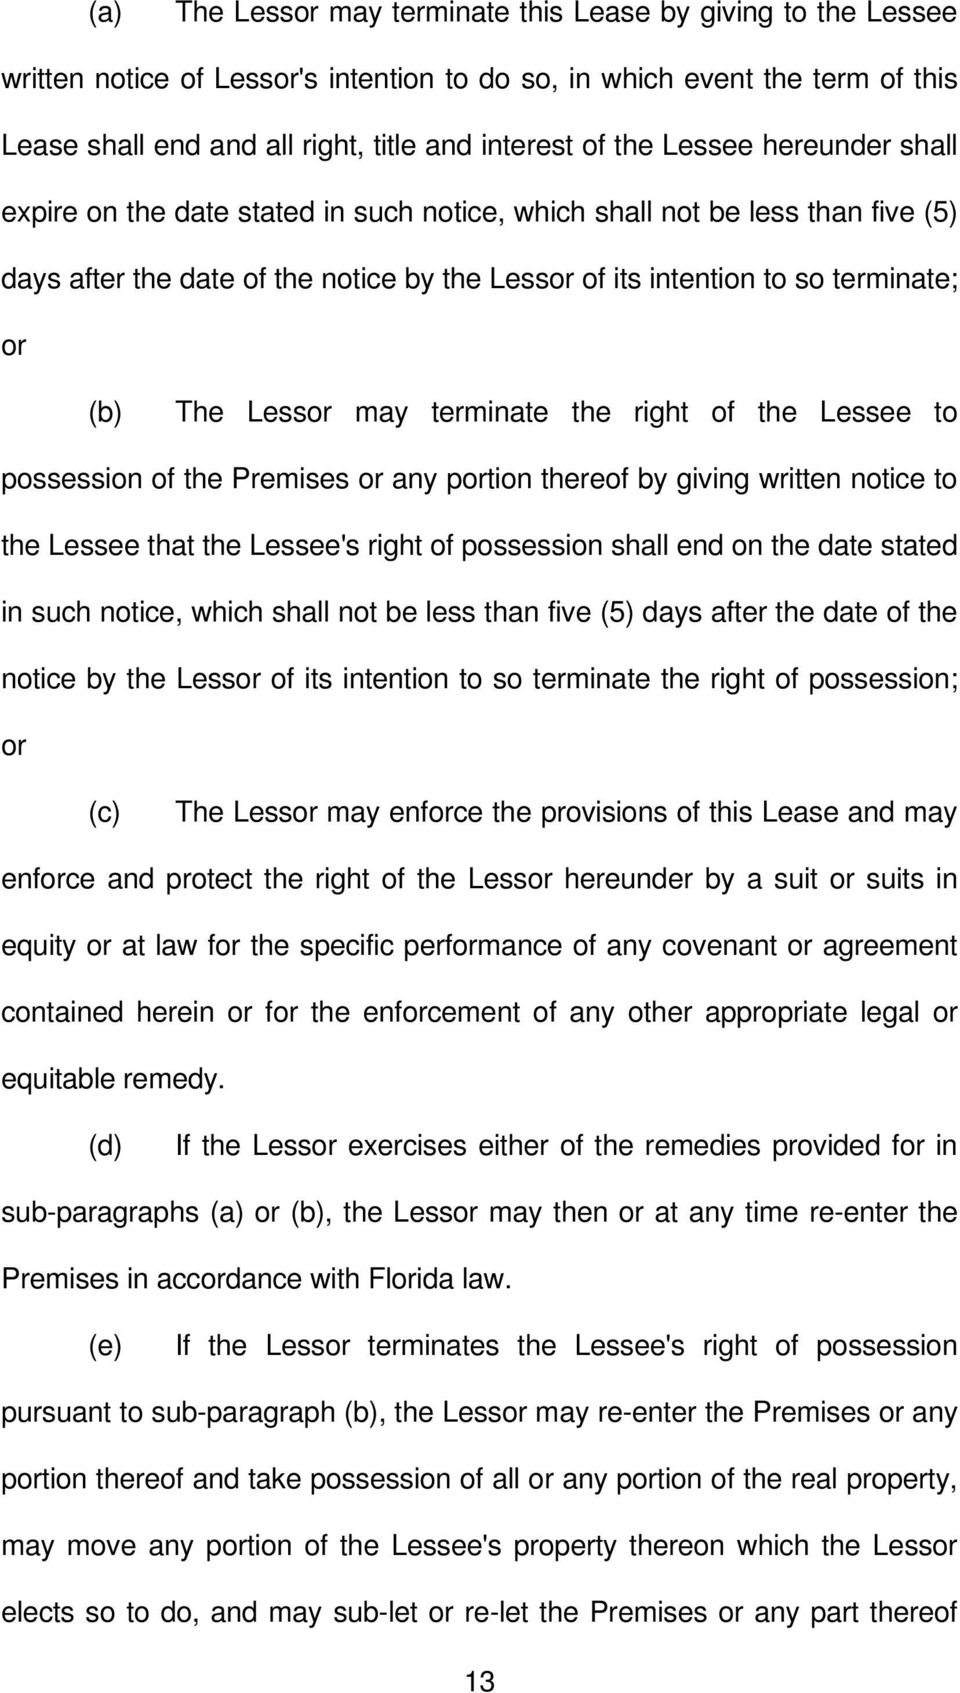 Lessor may terminate the right of the Lessee to possession of the Premises or any portion thereof by giving written notice to the Lessee that the Lessee's right of possession shall end on the date